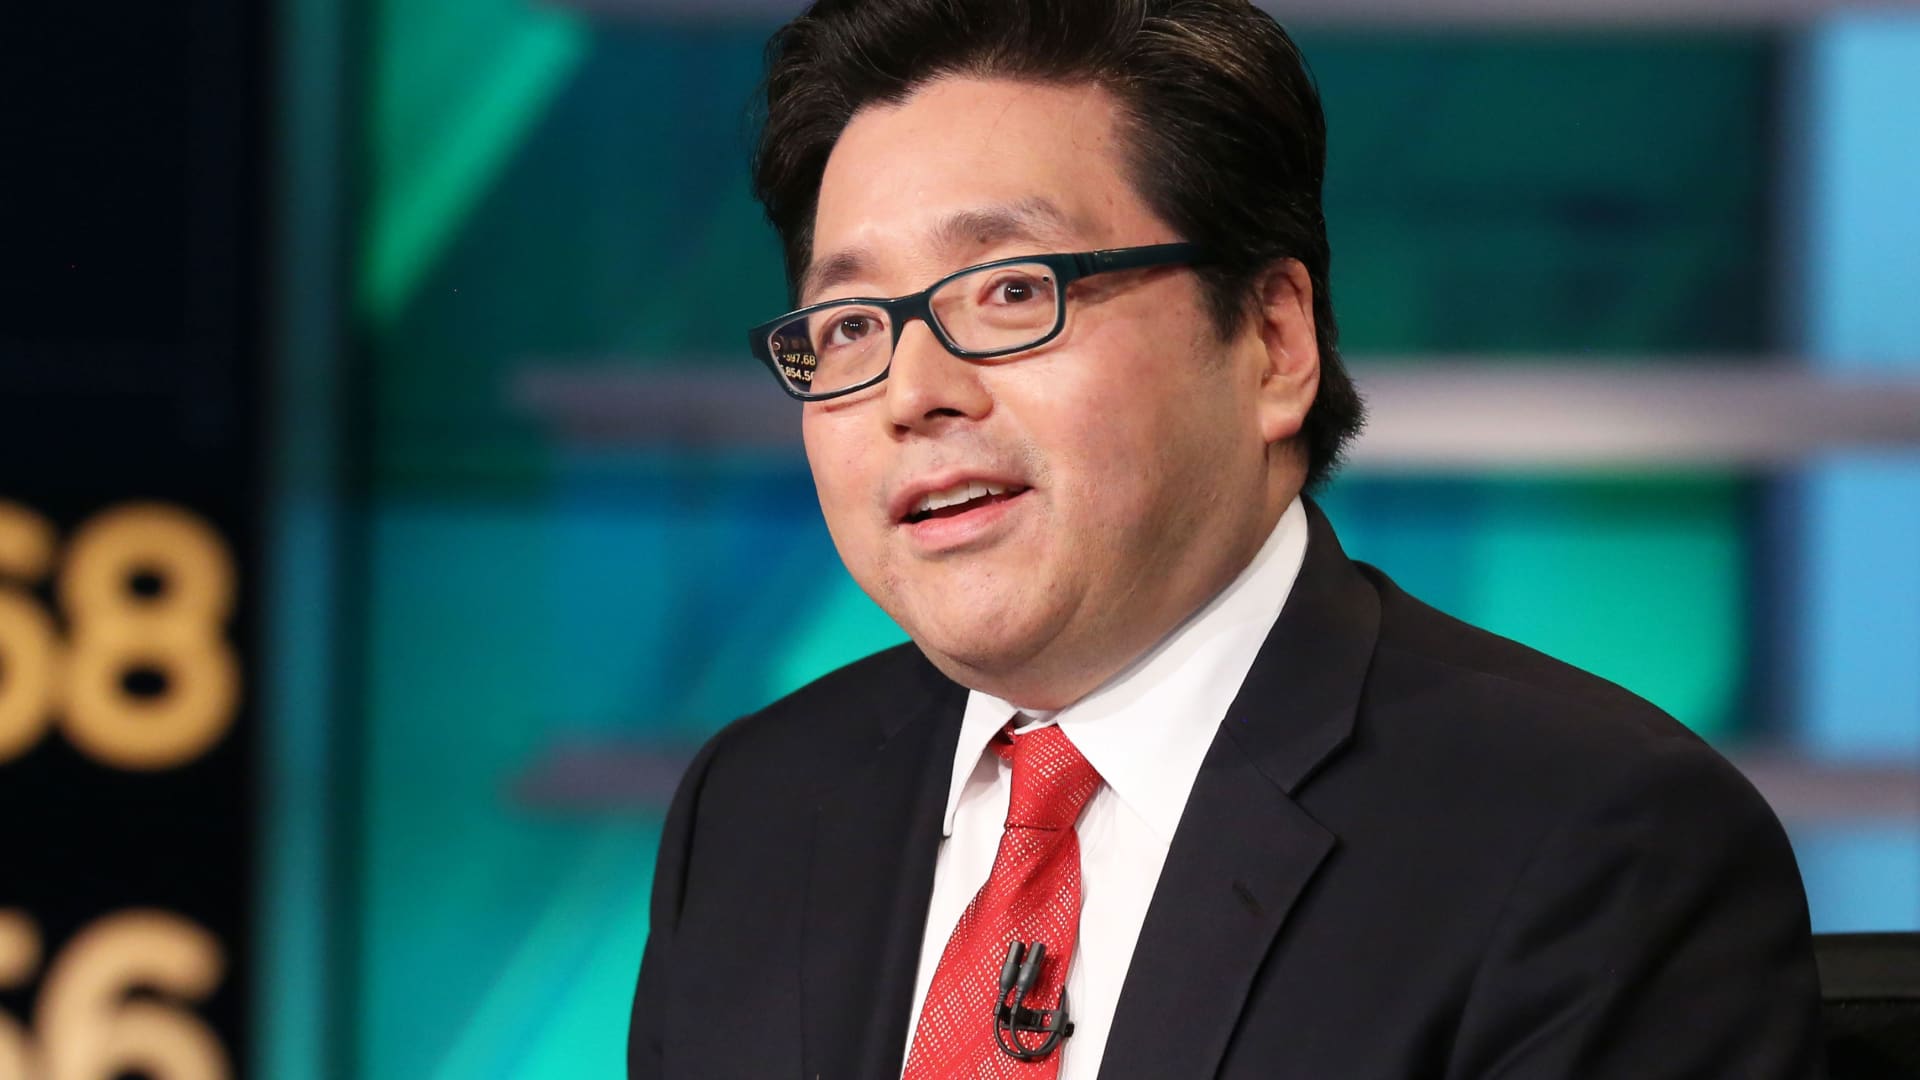 Fundstrat's Tom Lee says the lows for 2022 are in, calls for a full risk-on rally in second half thumbnail